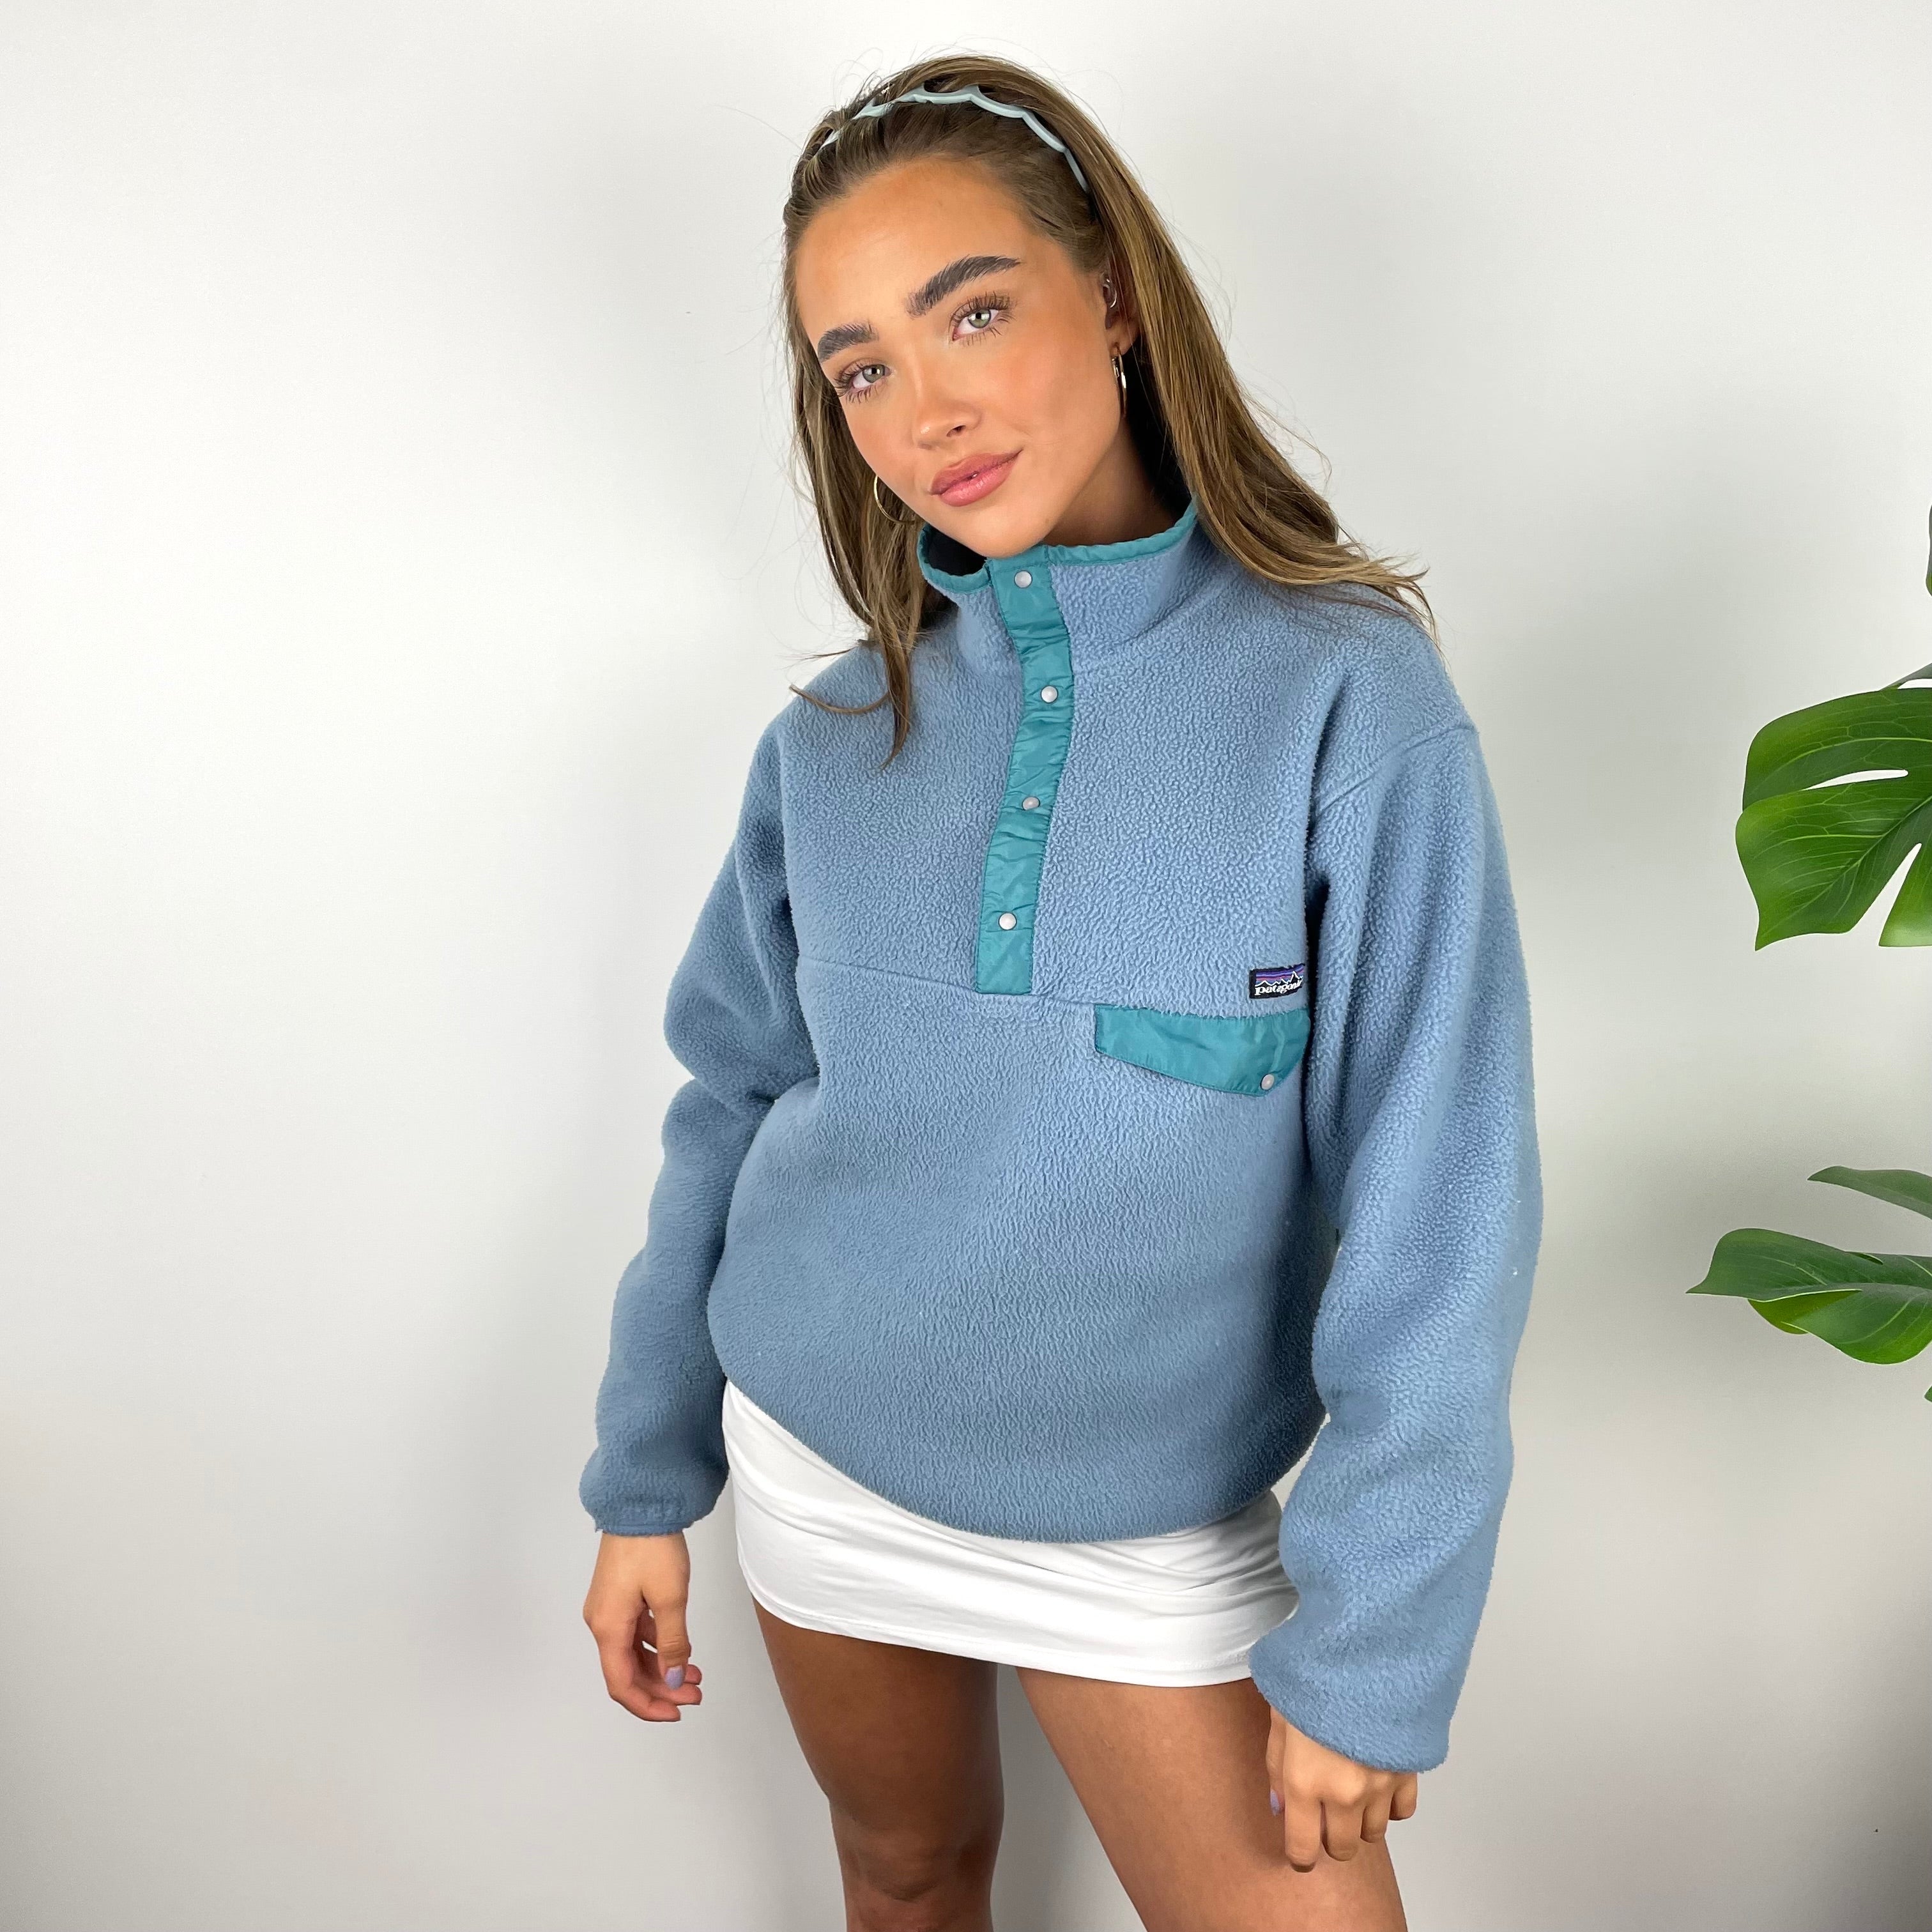 Patagonia RARE Baby Blue Embroidered Spell Out Teddy Bear Fleece Button Sweatshirt (M)